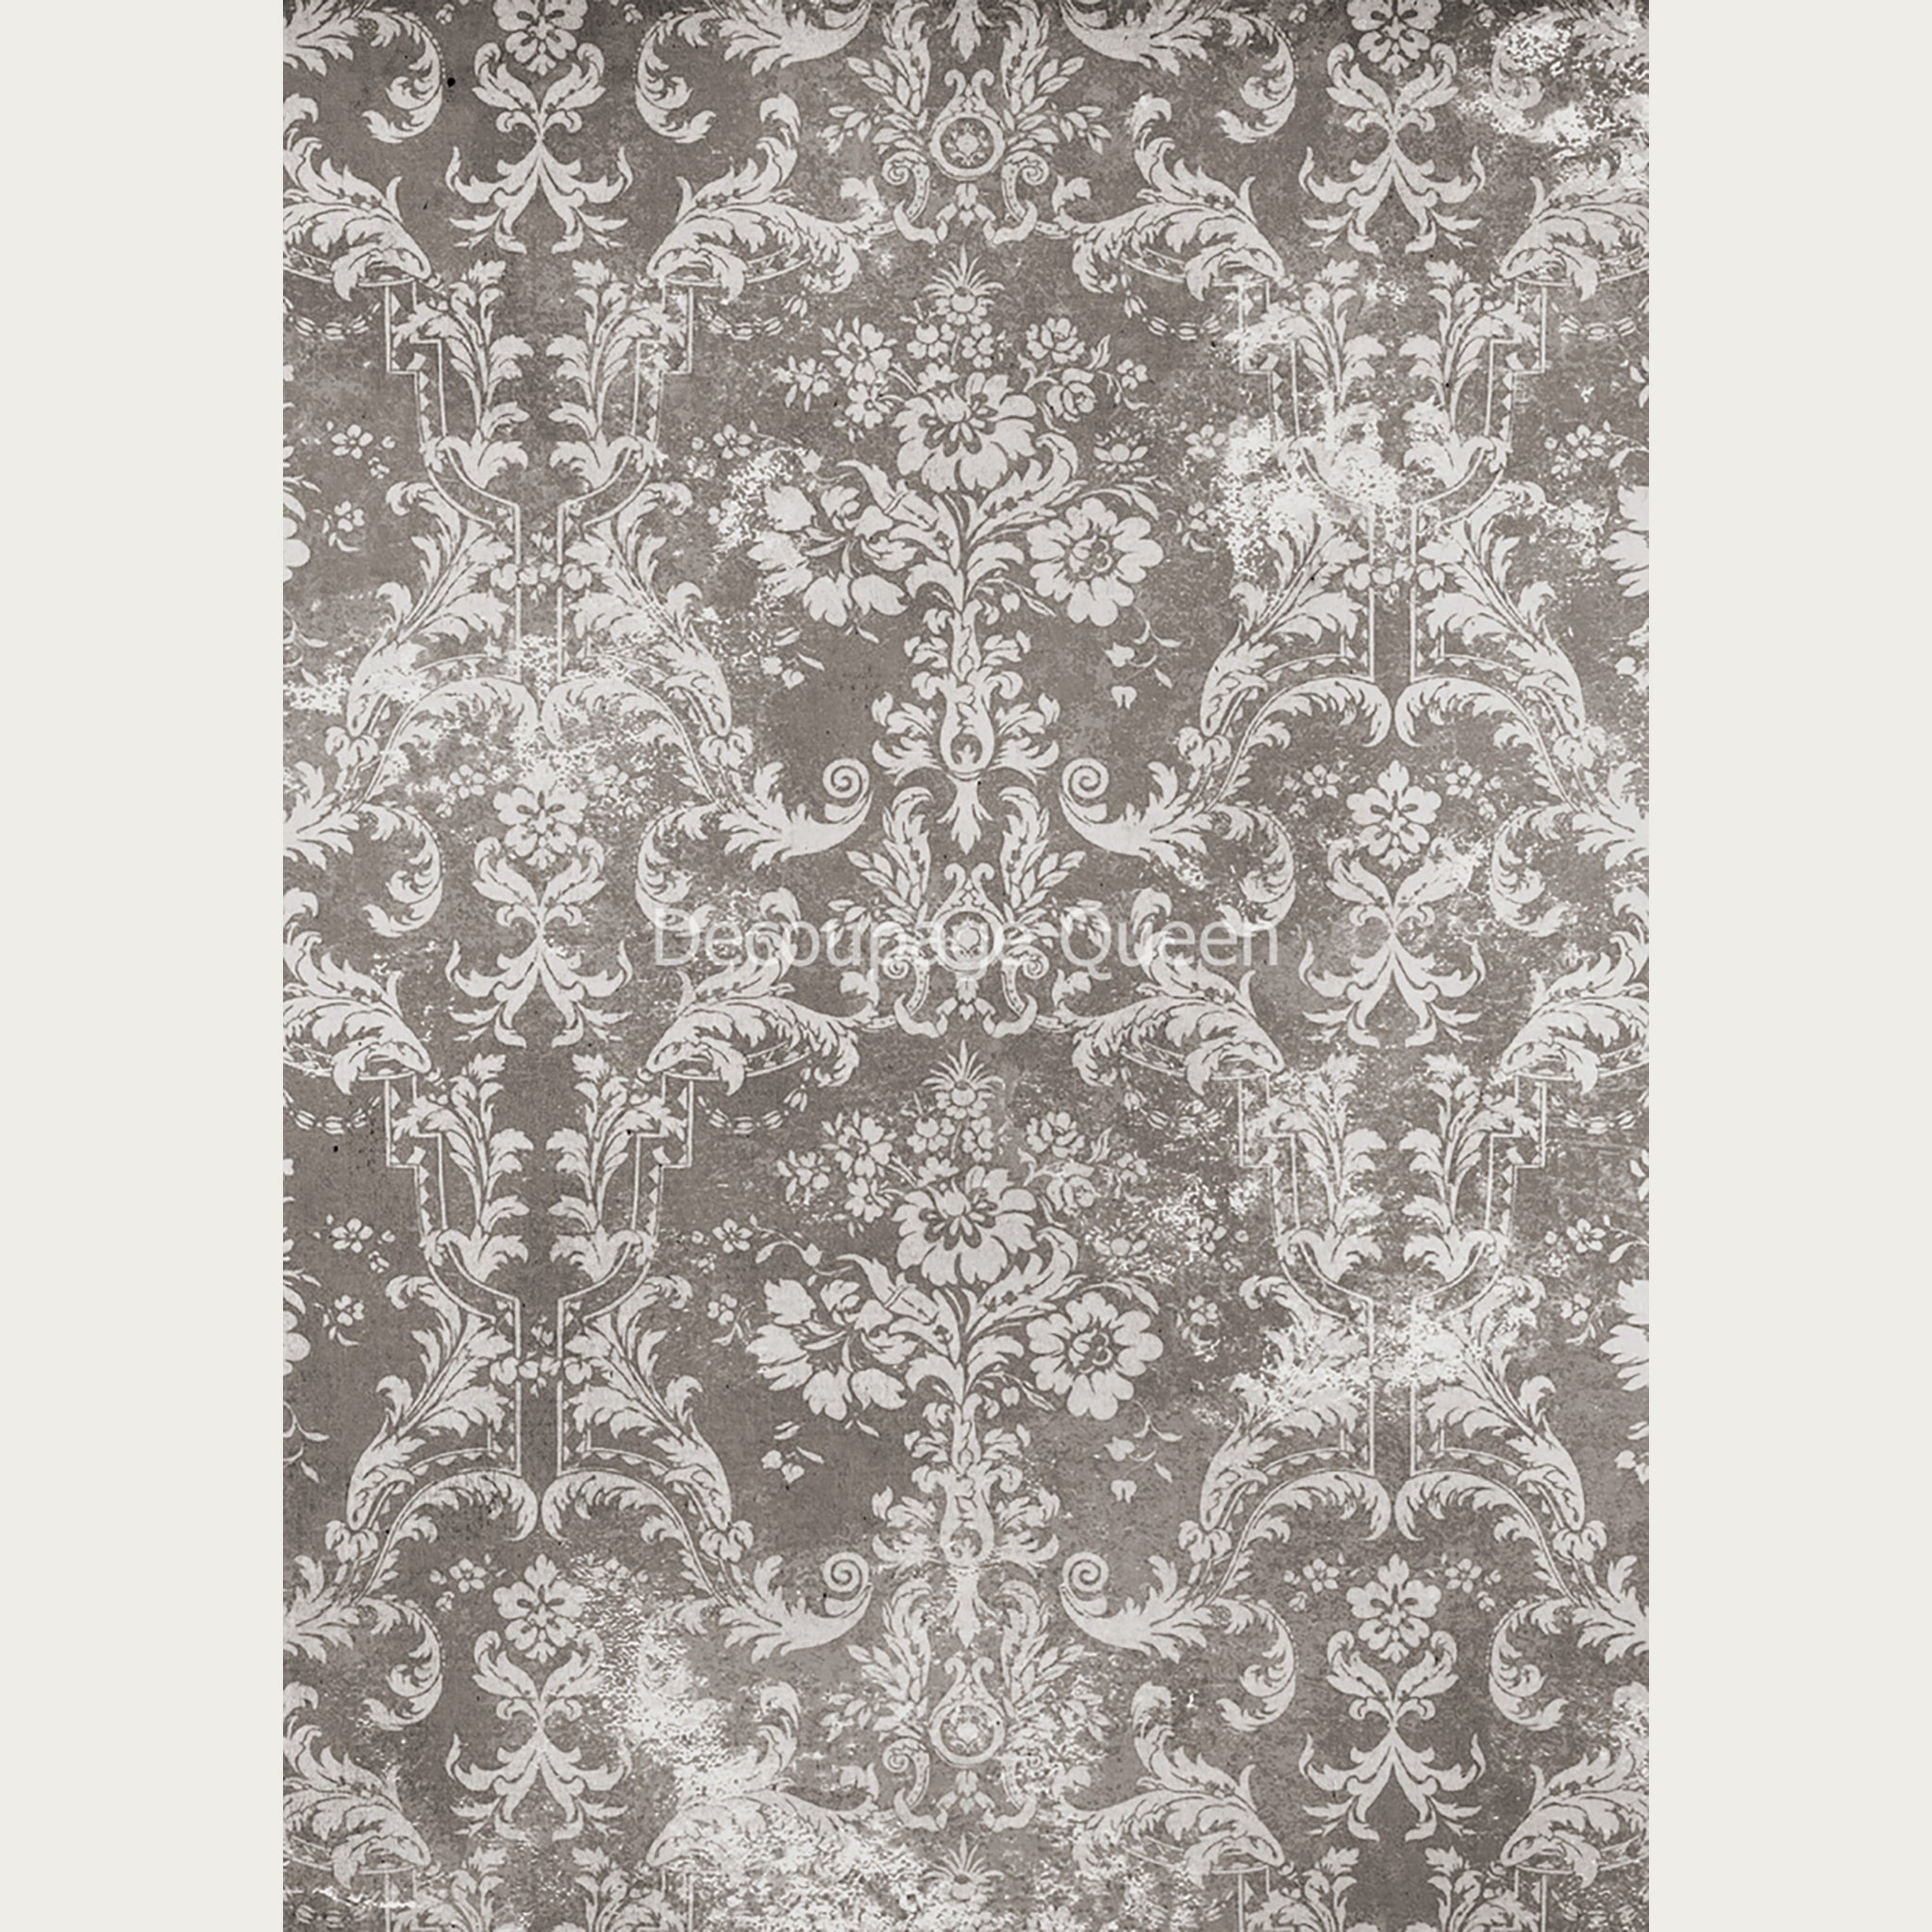 A0 rice paper of a light colored distressed floral damask design. White borders are on the sides.